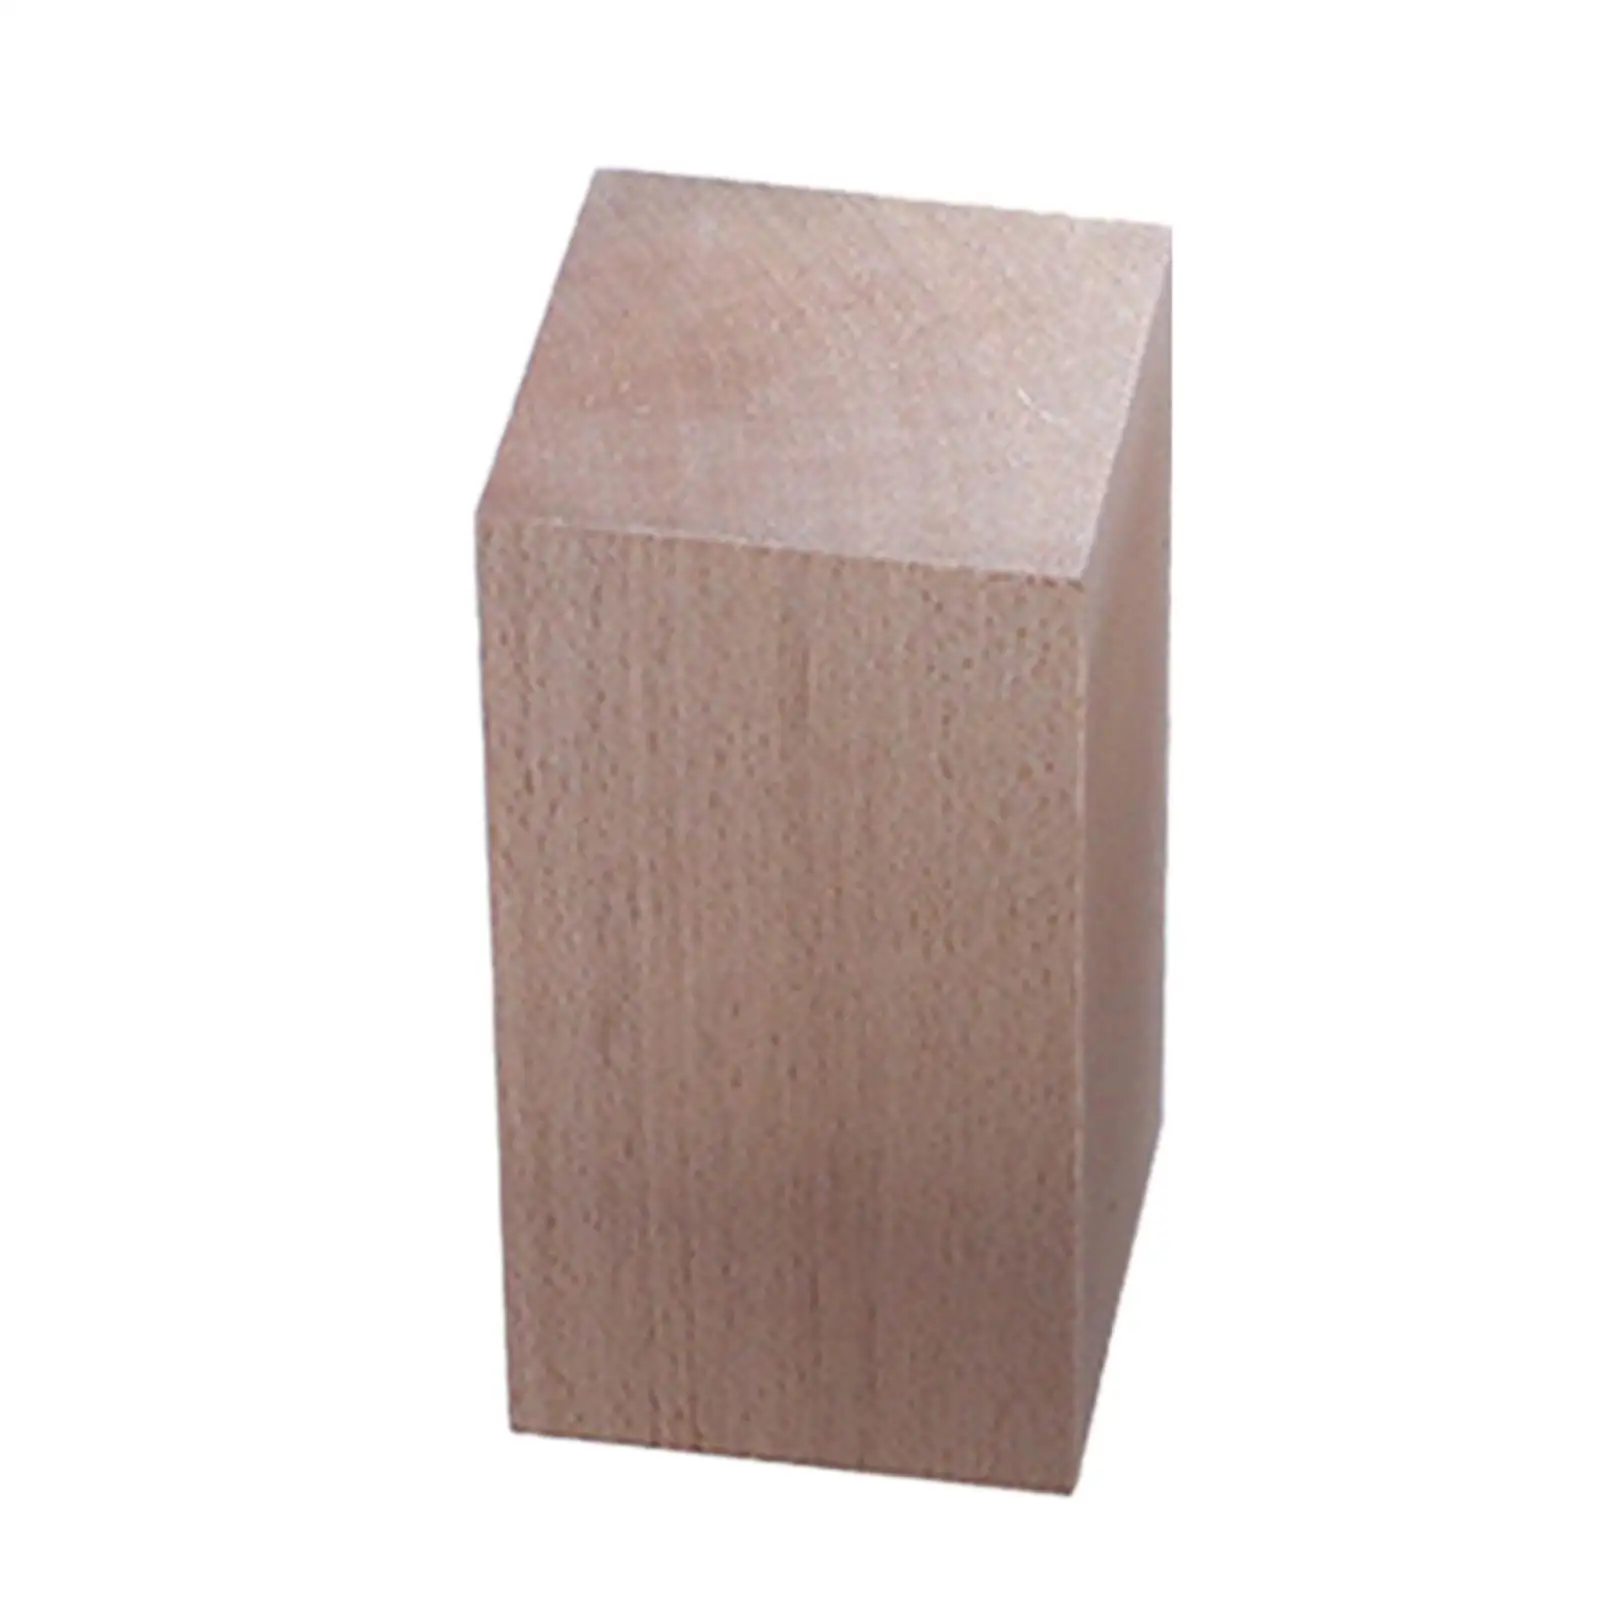 Pack Of 10, Basswood Carving Wood Blocks, Turning Blanks, 1 1/4 x1 1/4  x 4